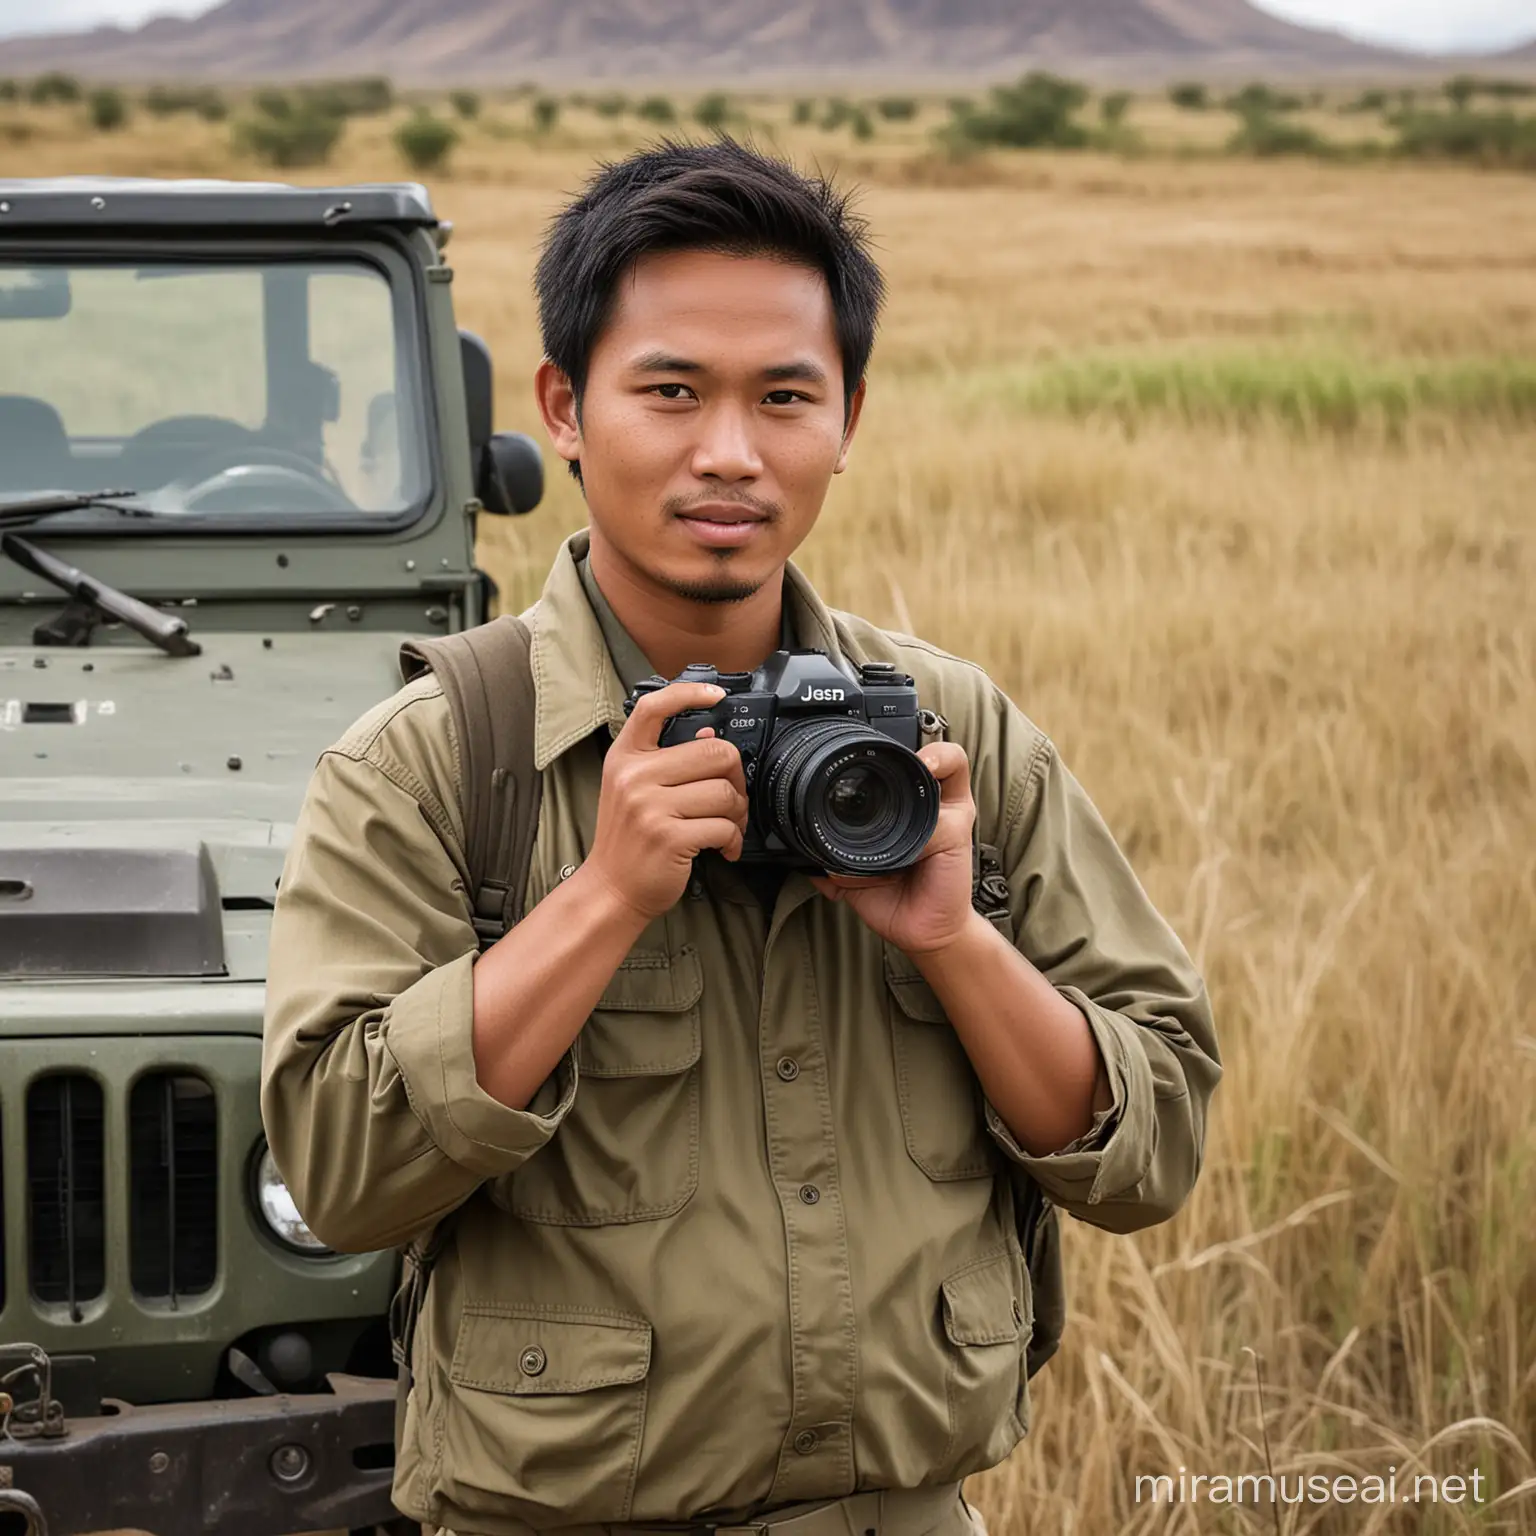 Real image, an Indonesian man with a clean, little chubby face, handsome face holding a camera with a telephoto lens, dressed in field clothes, with a jeep in the background in a grassland and sand, photographed at a distance of 5 meters by a professional photographer